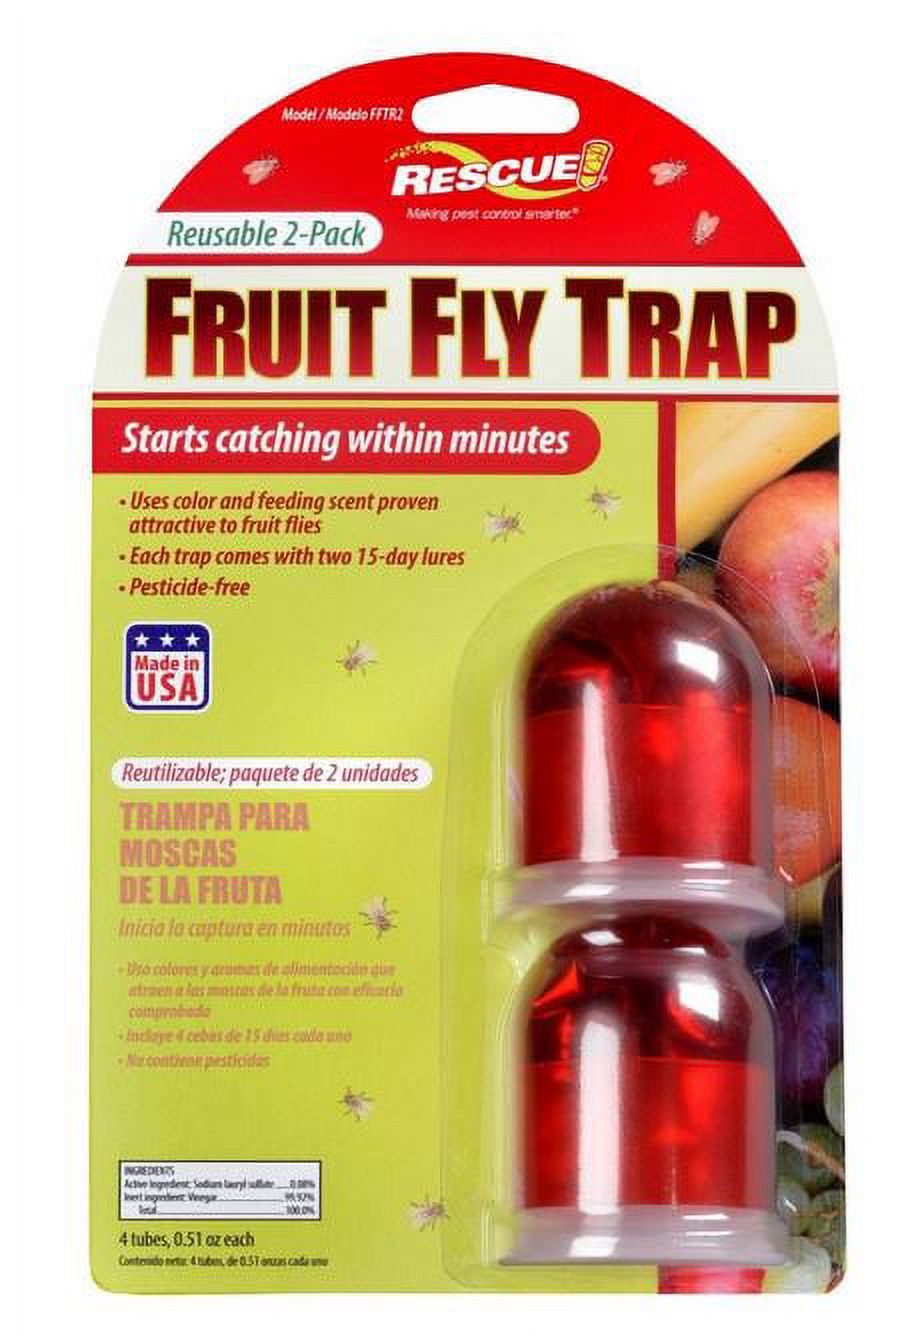 Rescue! FFTR2-SF6 Reusable Fruit Fly Trap, 2-Pack, Each - image 1 of 7